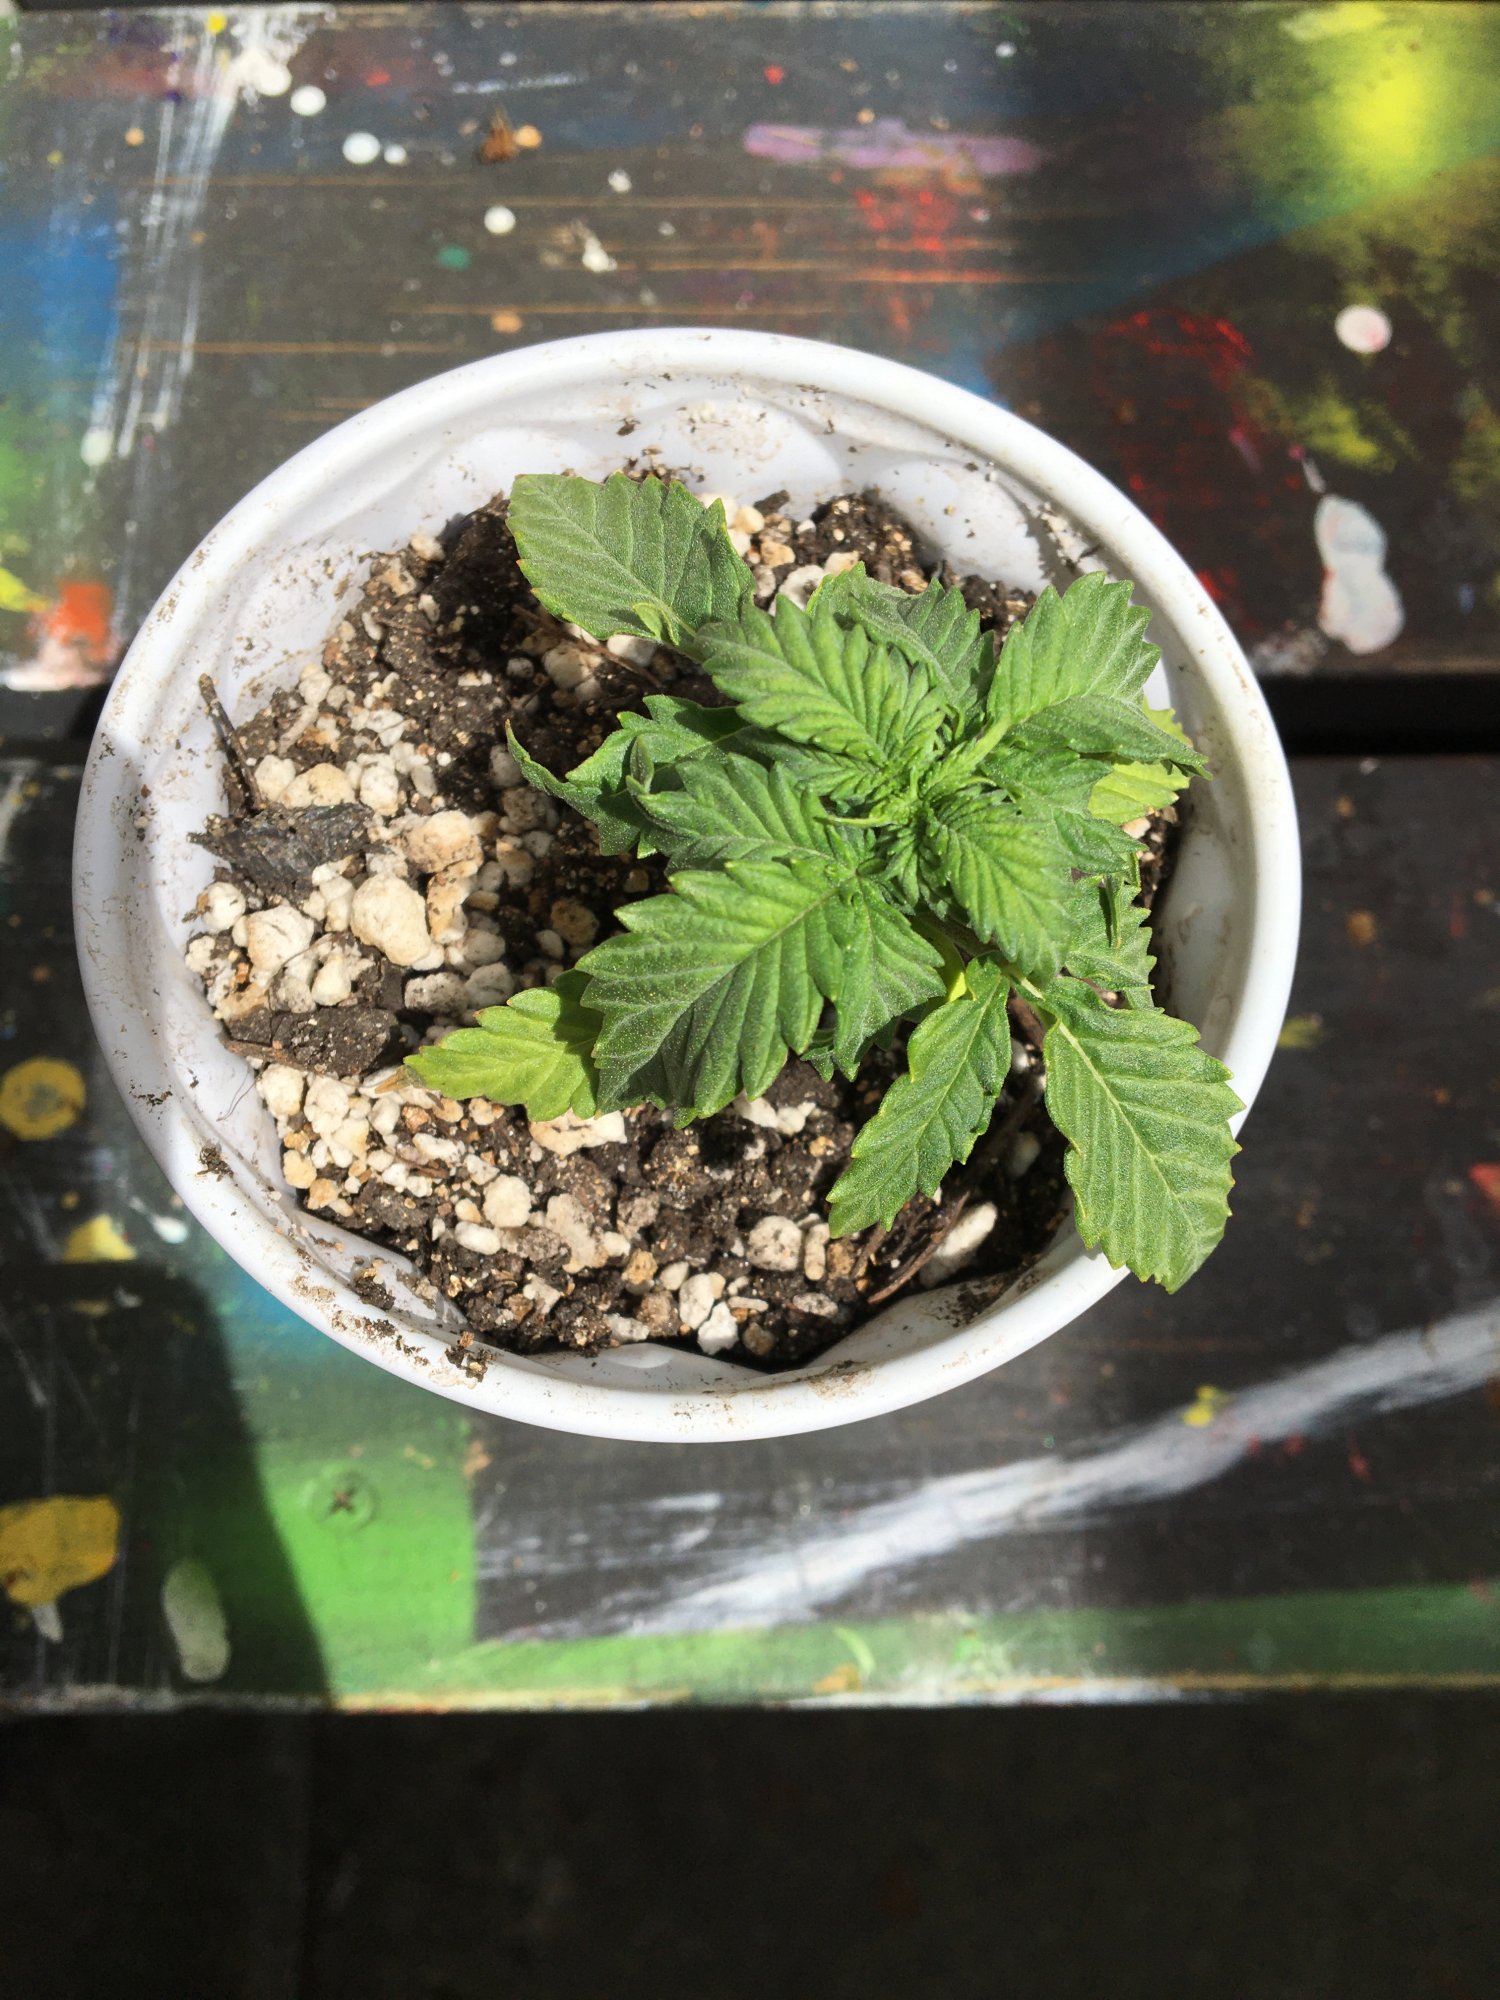 Leaf curling and yellowing issues on seedlings